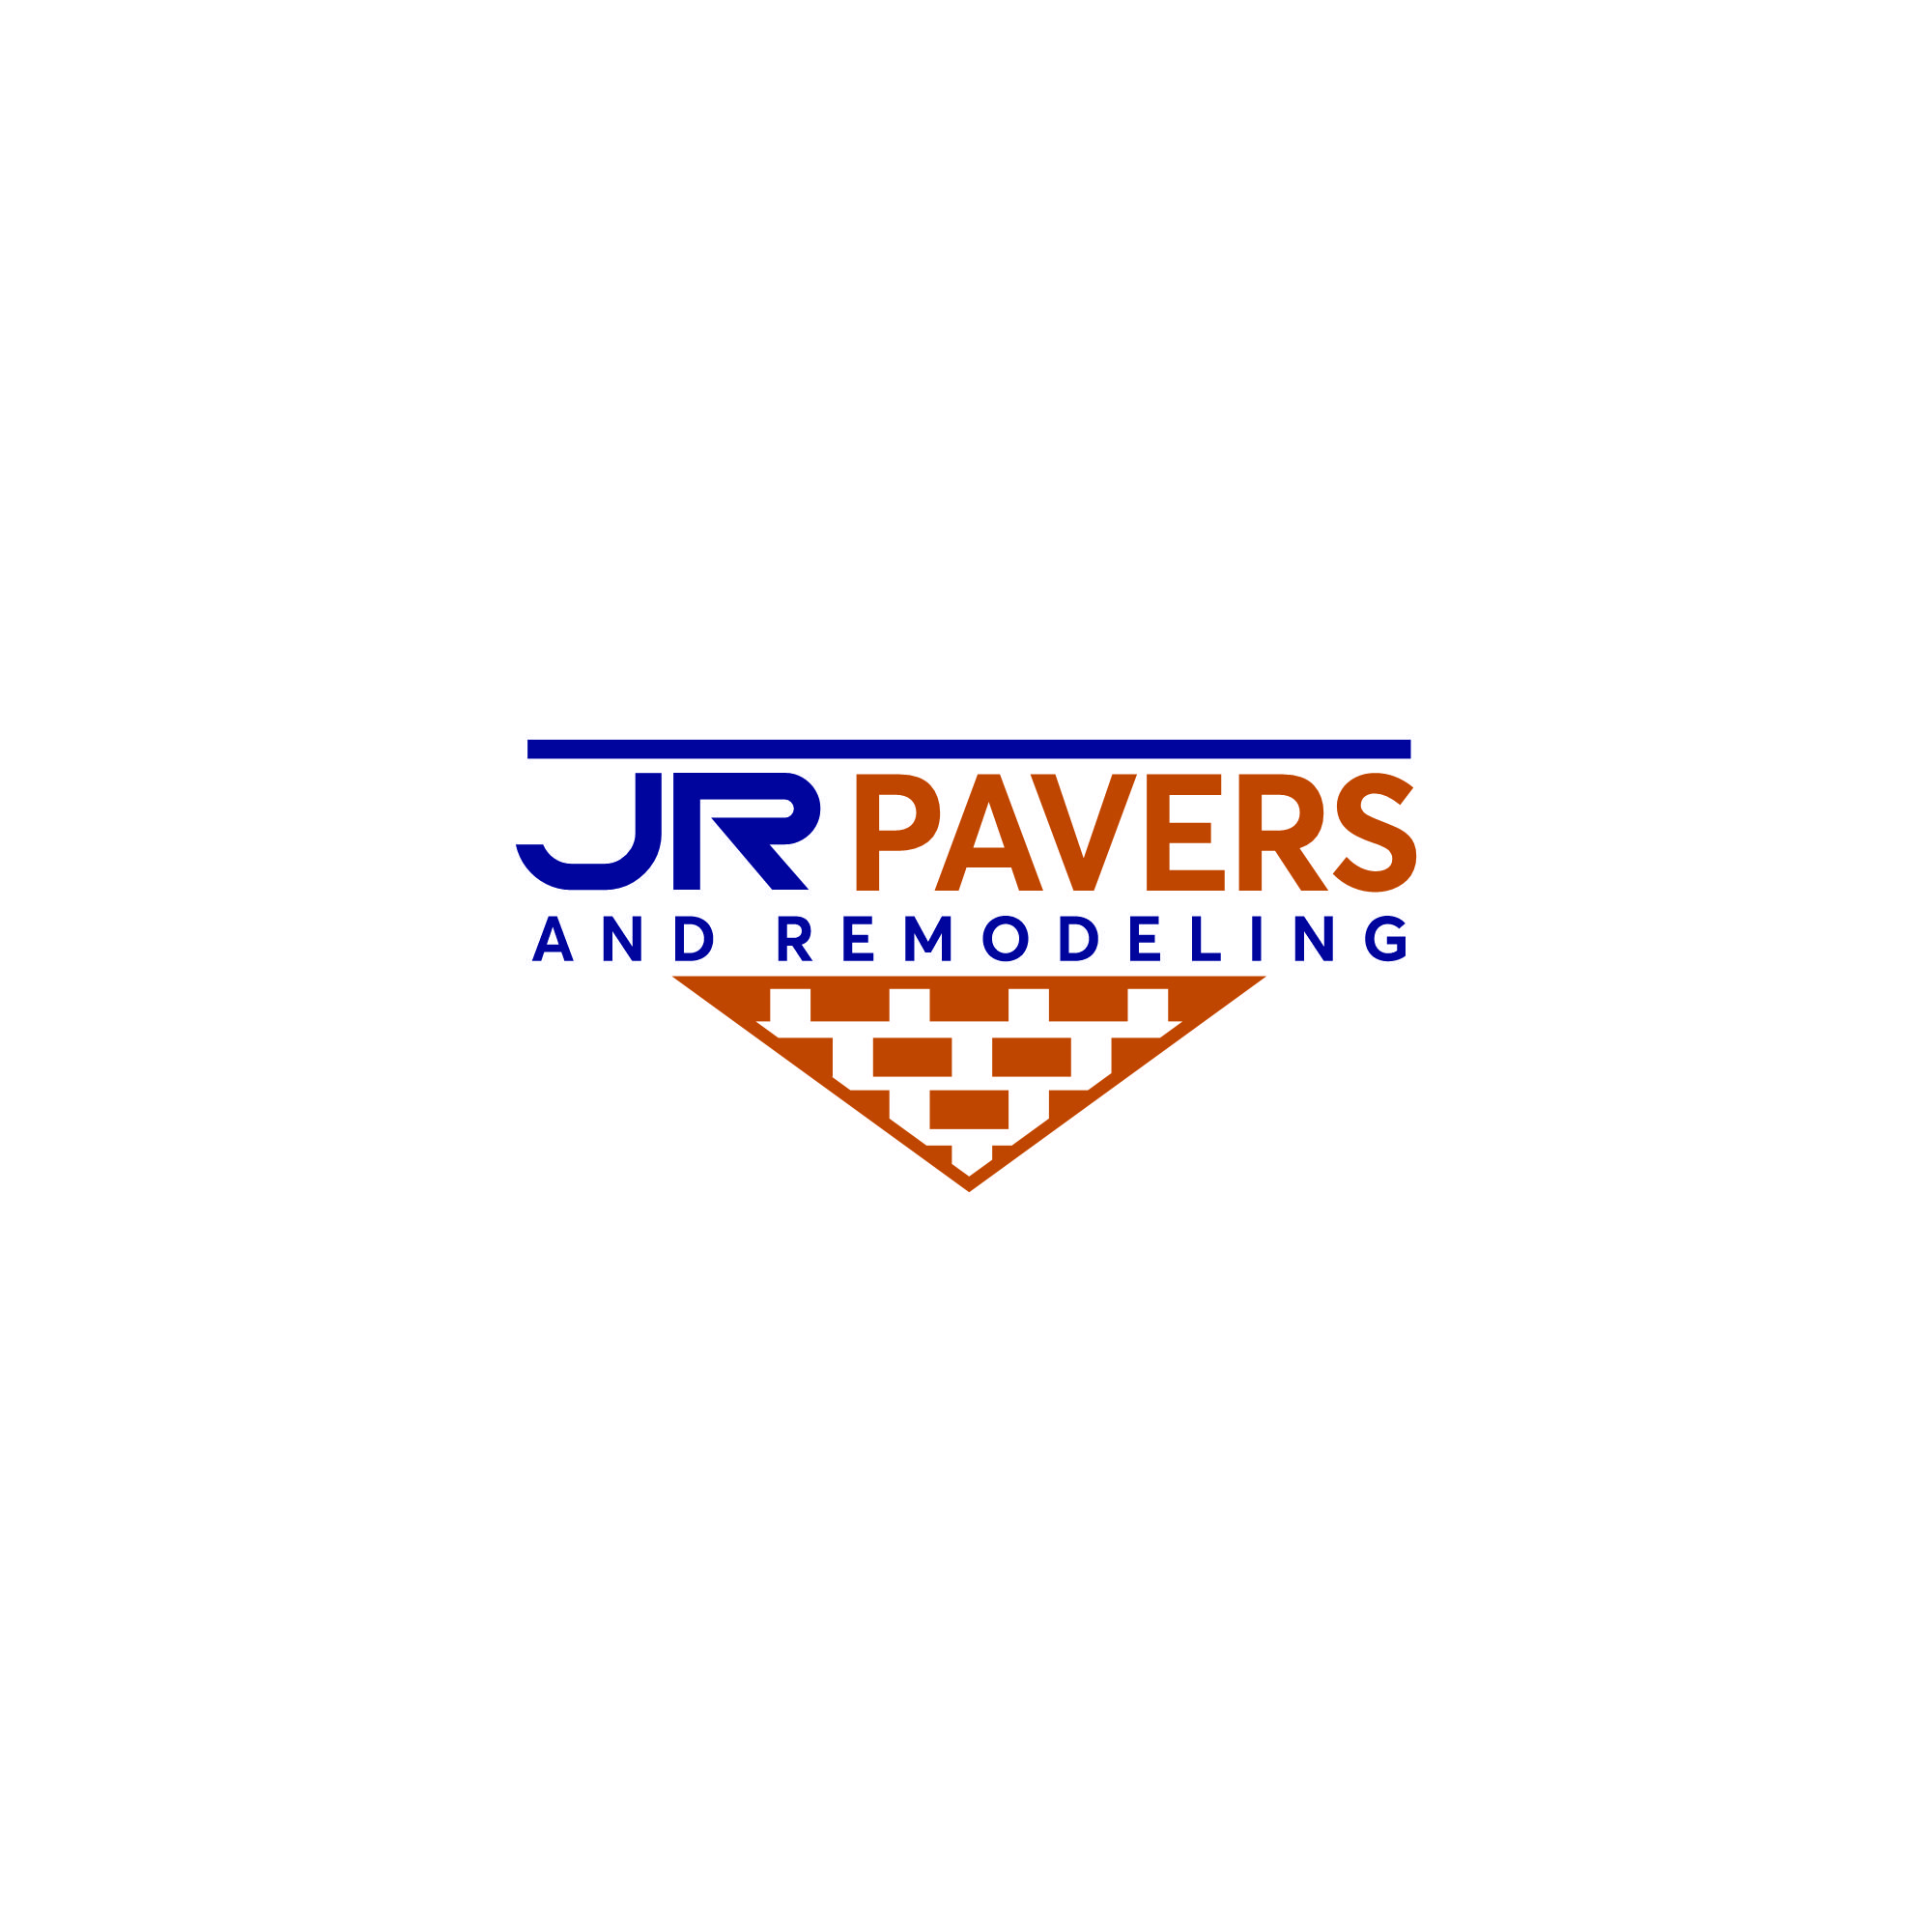 JR Pavers And Remodeling